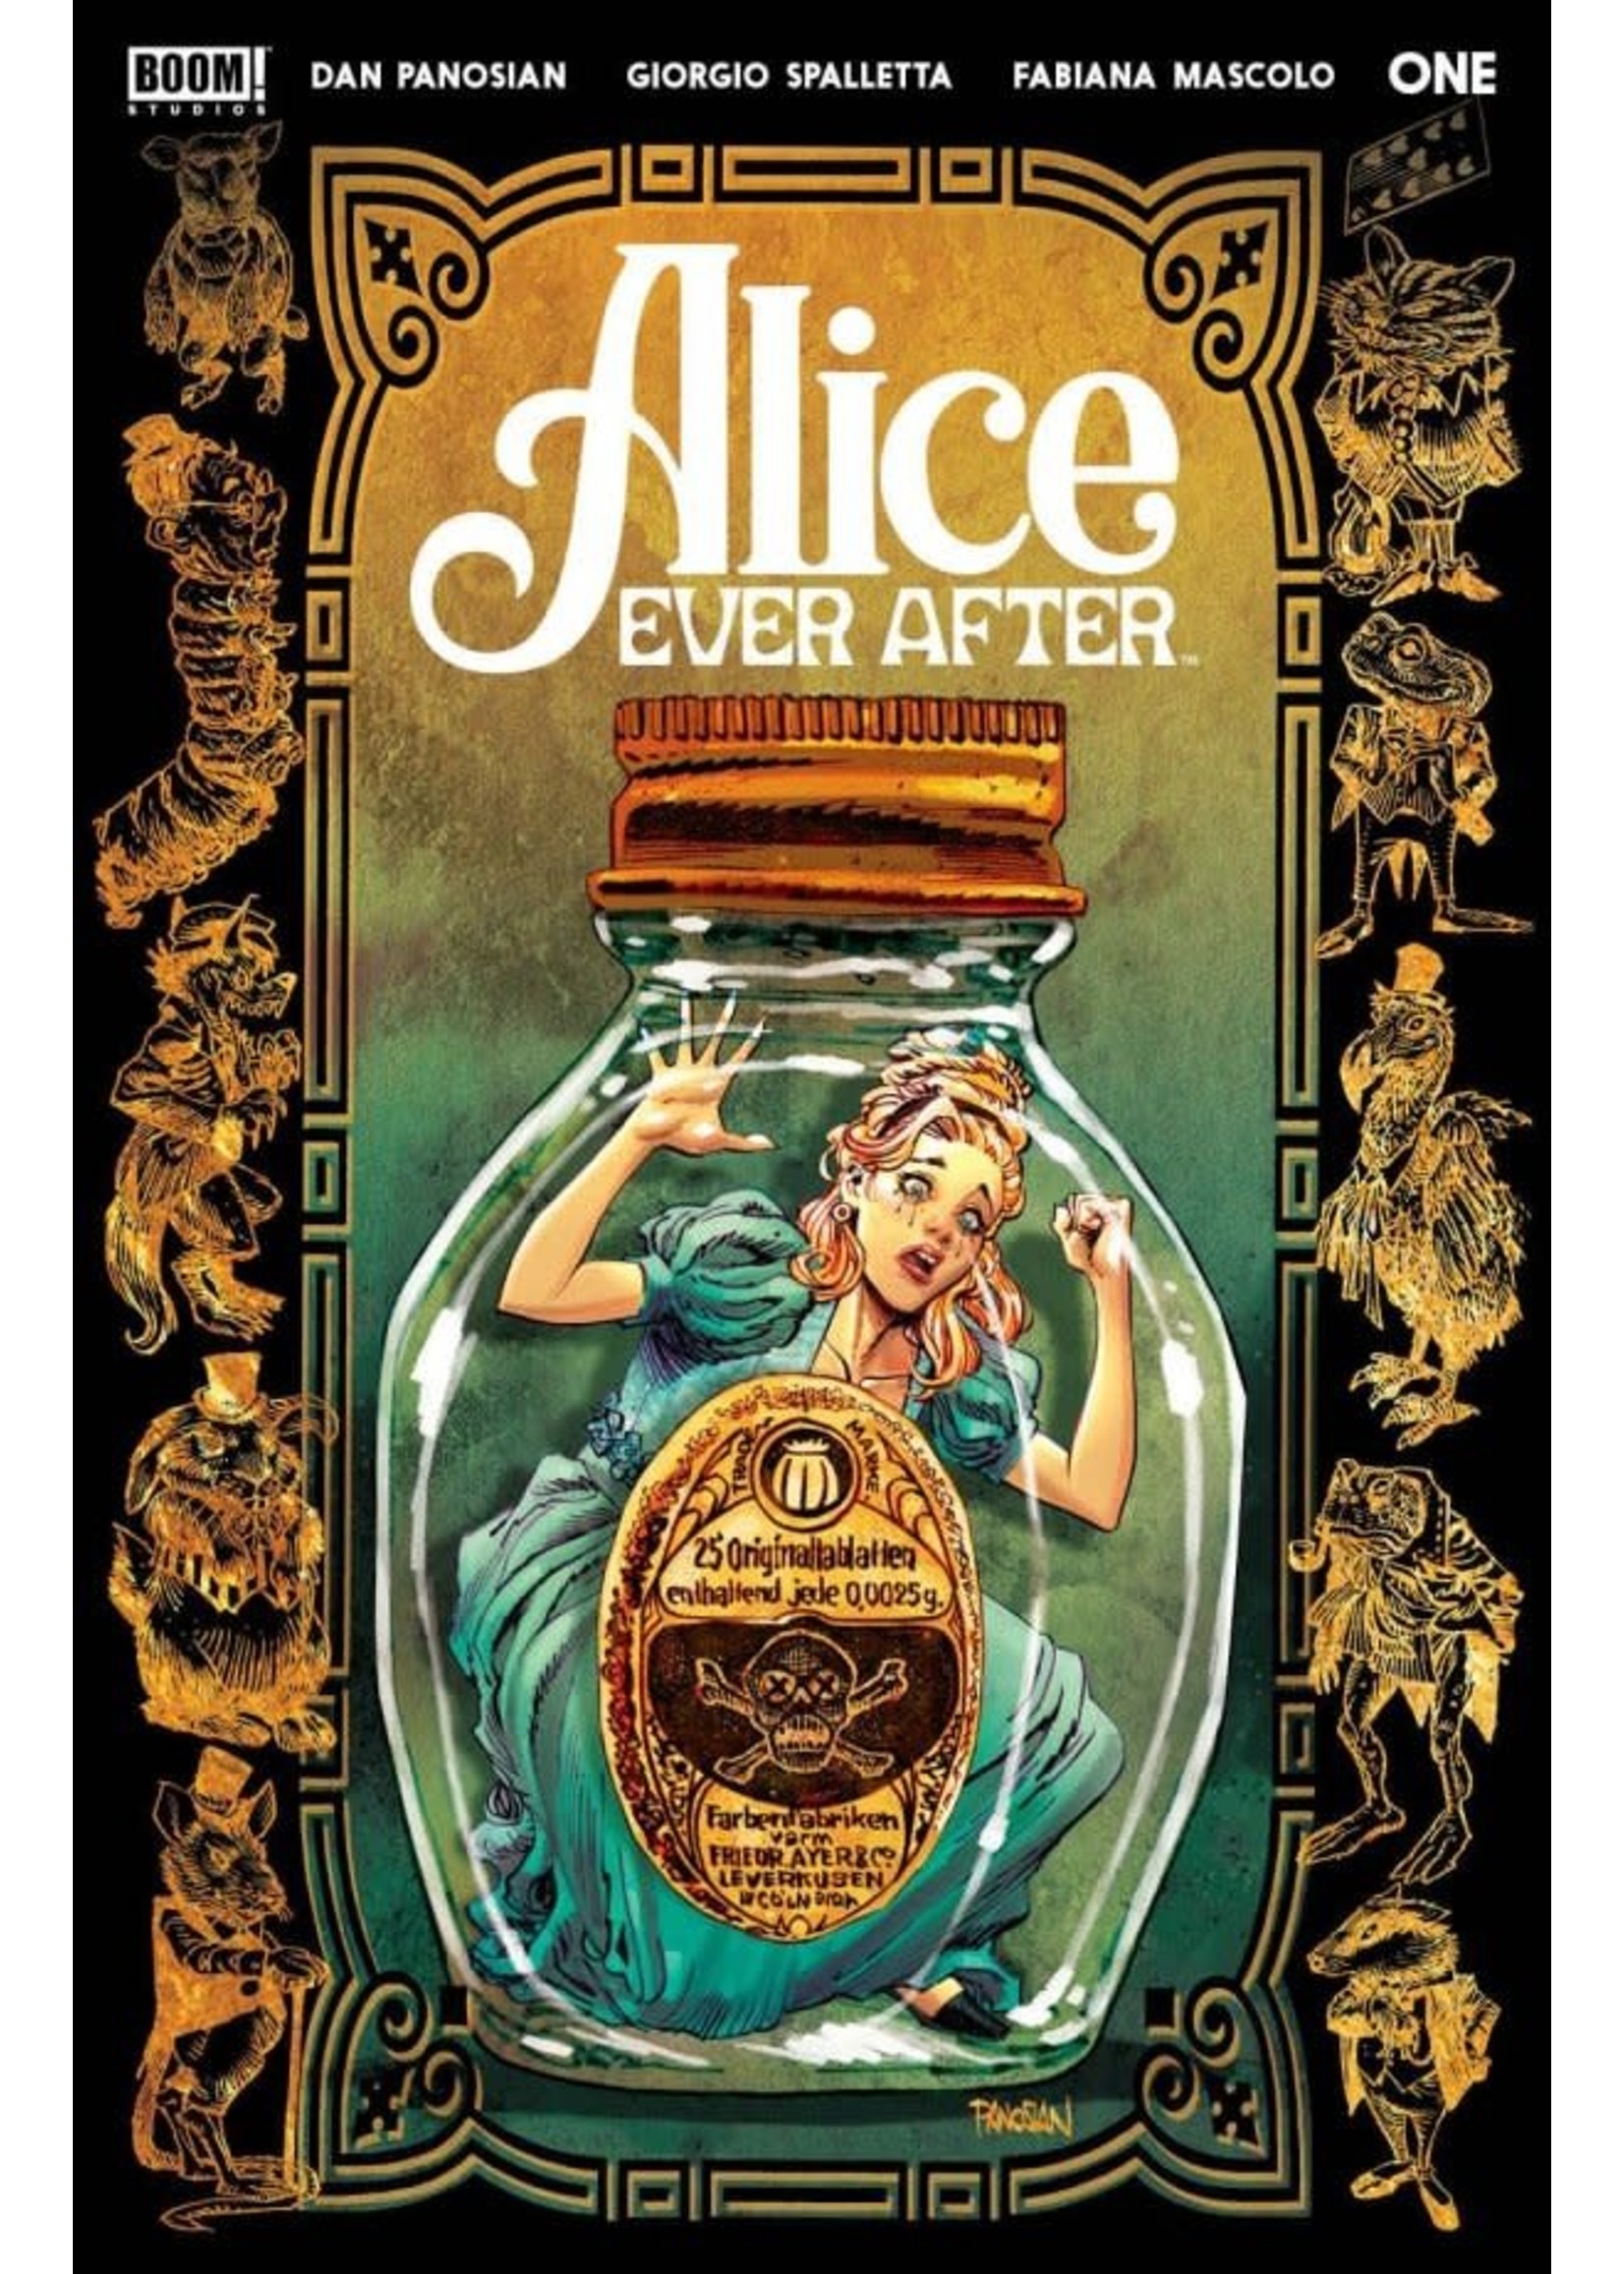 Alice Ever After #1 (of 5)